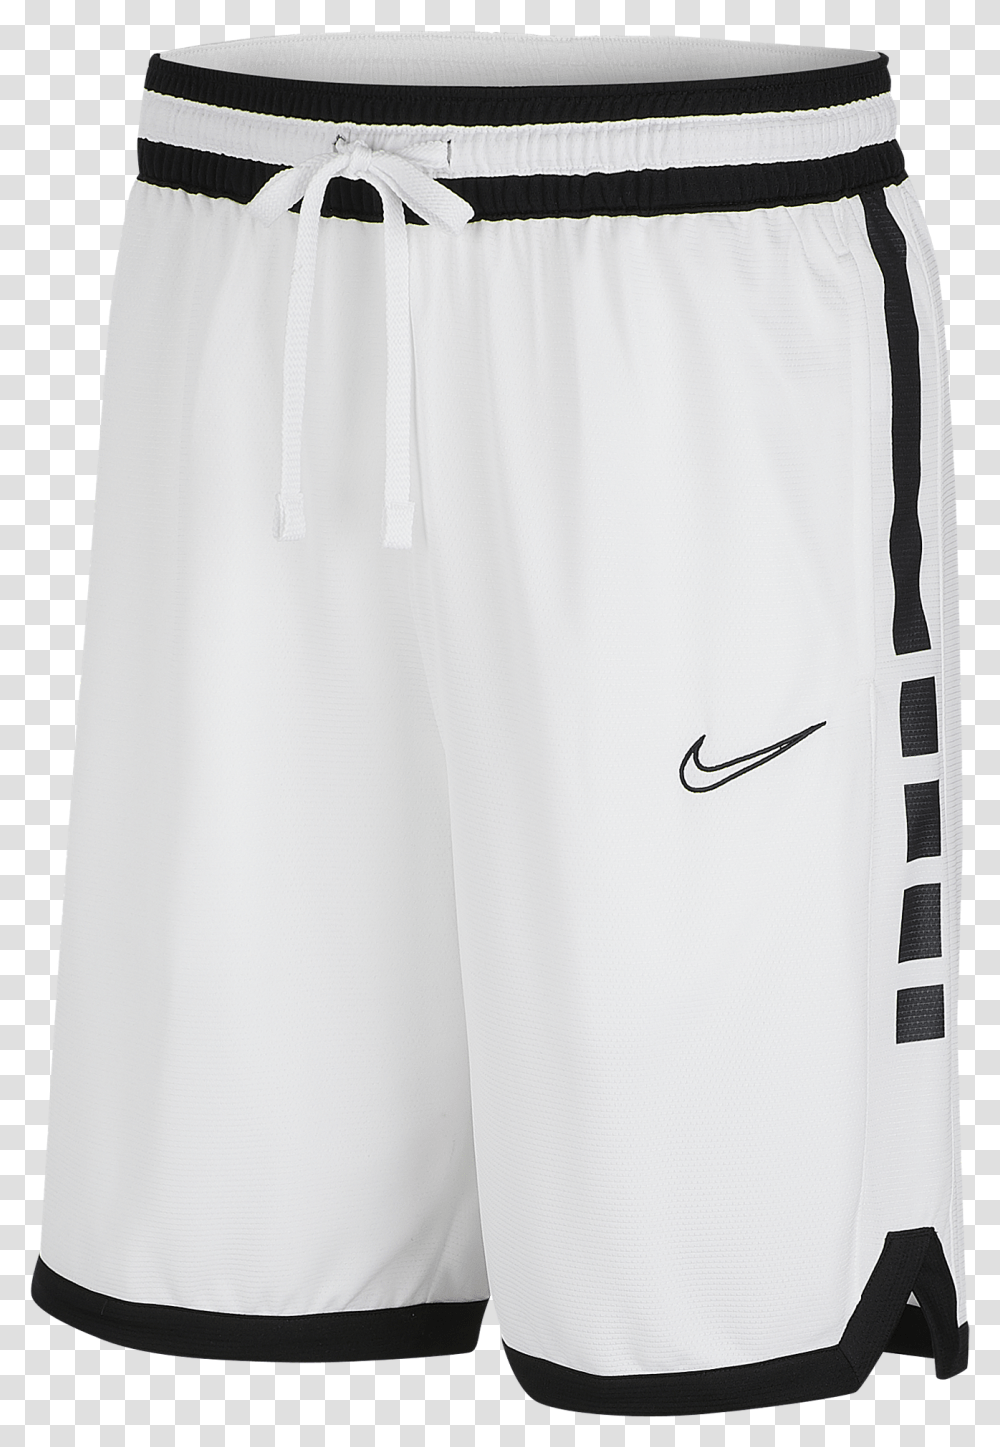 Elite Dri Fit Basketball Shorts In White Black Black Rugby Shorts, Clothing, Apparel, Undershirt, Text Transparent Png